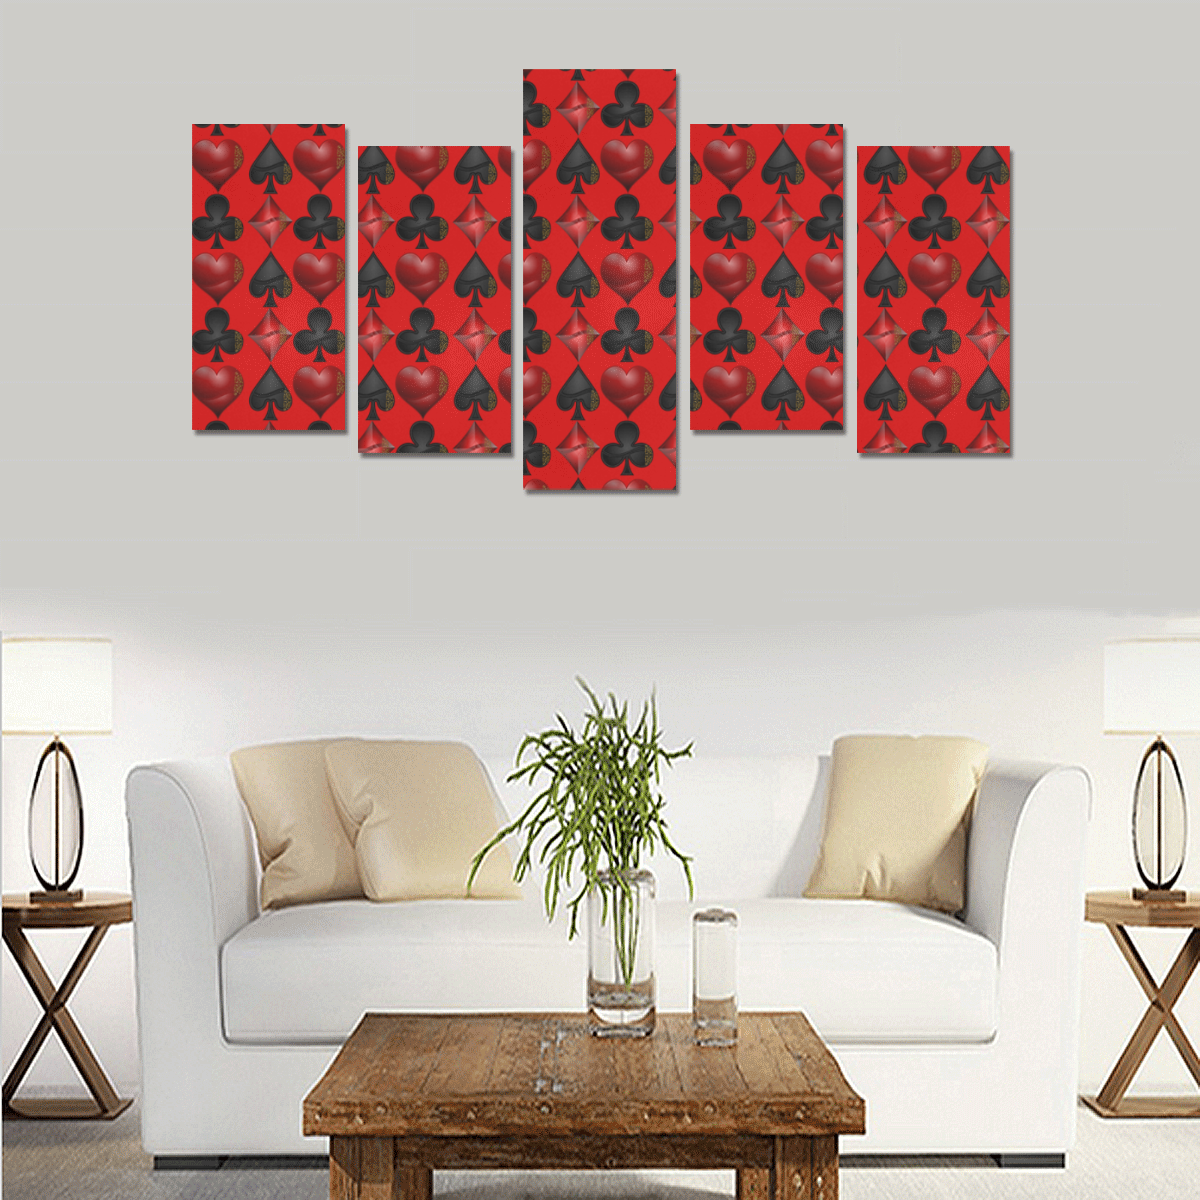 Las Vegas Black and Red Casino Poker Card Shapes on Red Canvas Print Sets E (No Frame)